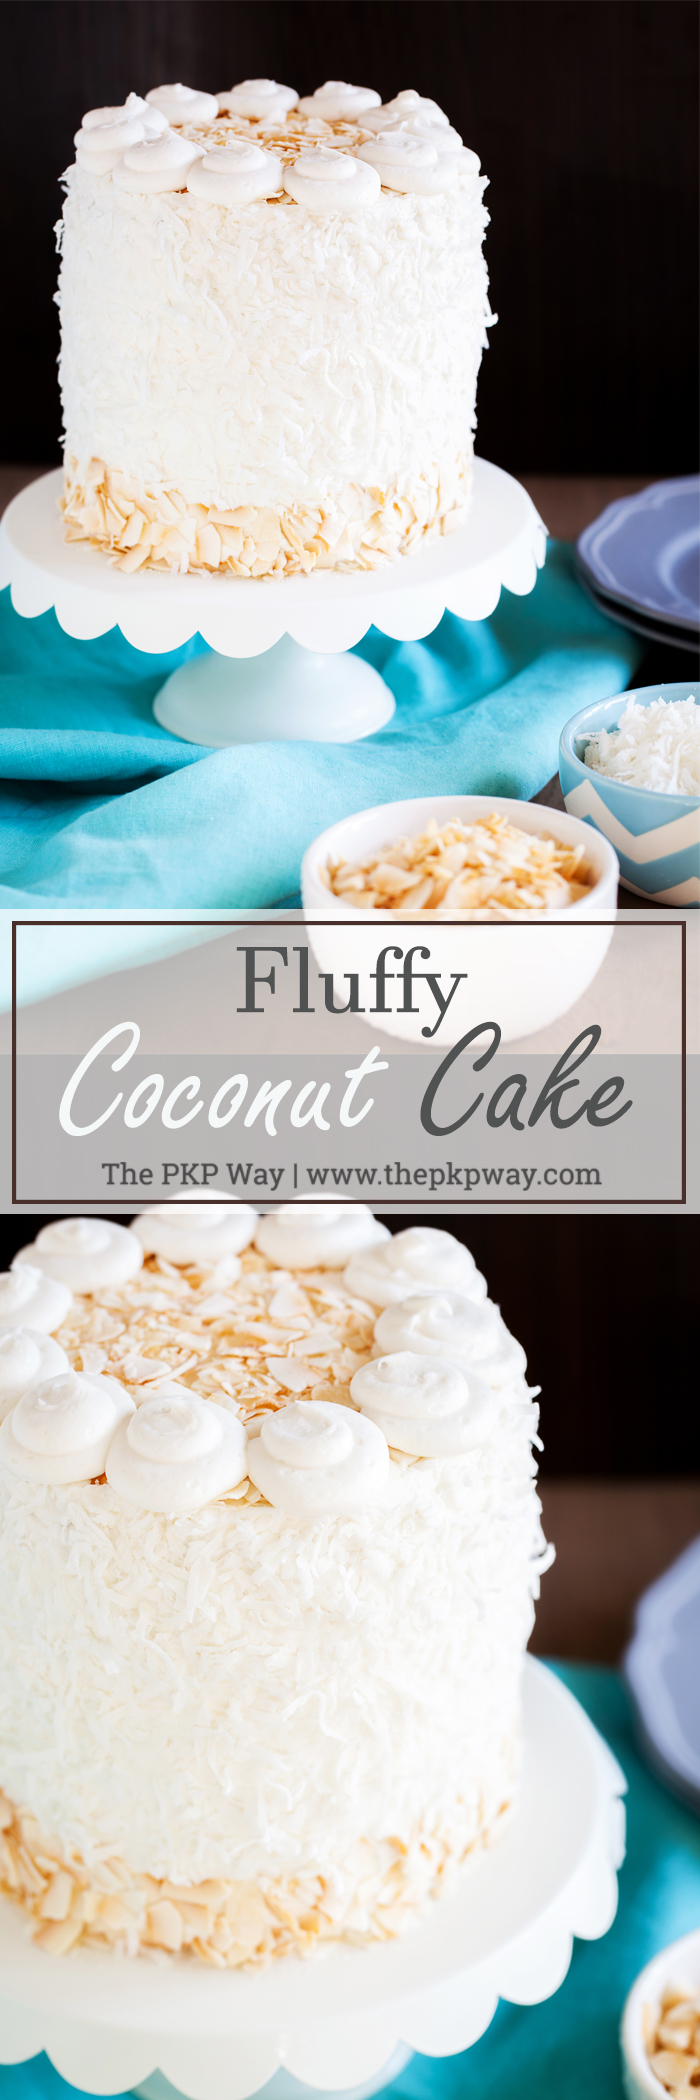 Moist and fluffy coconut cake is studded with shredded coconut, filled and covered with a luscious coconut frosting made from coconut milk, and adorned with BOTH toasted coconut and sweetened coconut.